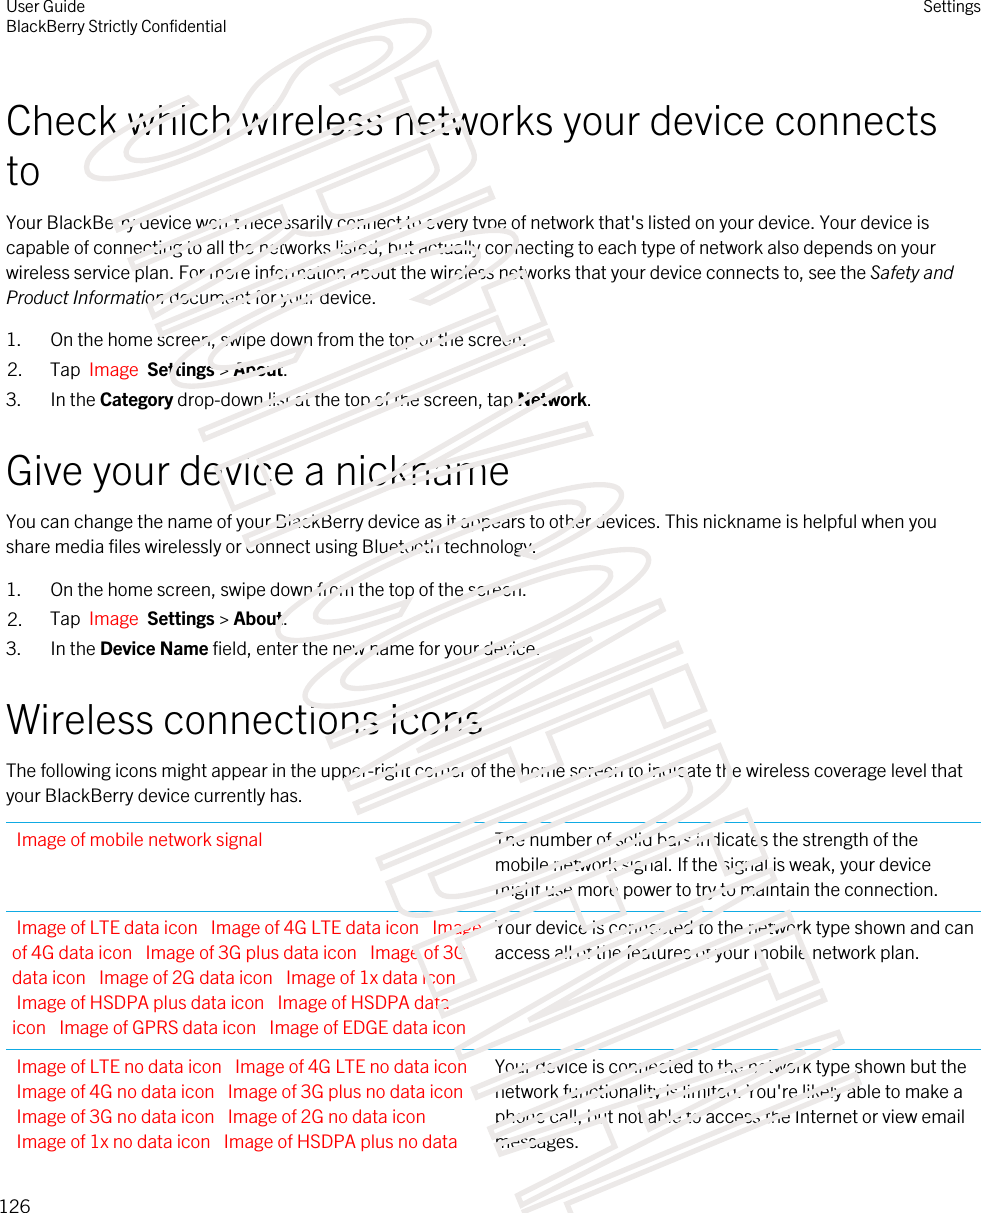 Check which wireless networks your device connects toYour BlackBerry device won&apos;t necessarily connect to every type of network that&apos;s listed on your device. Your device is capable of connecting to all the networks listed, but actually connecting to each type of network also depends on your wireless service plan. For more information about the wireless networks that your device connects to, see the Safety and Product Information document for your device.1. On the home screen, swipe down from the top of the screen.2. Tap  Image  Settings &gt; About.3. In the Category drop-down list at the top of the screen, tap Network.Give your device a nicknameYou can change the name of your BlackBerry device as it appears to other devices. This nickname is helpful when you share media files wirelessly or connect using Bluetooth technology.1. On the home screen, swipe down from the top of the screen.2. Tap  Image  Settings &gt; About.3. In the Device Name field, enter the new name for your device.Wireless connections iconsThe following icons might appear in the upper-right corner of the home screen to indicate the wireless coverage level that your BlackBerry device currently has.Image of mobile network signal The number of solid bars indicates the strength of the mobile network signal. If the signal is weak, your device might use more power to try to maintain the connection.Image of LTE data icon  Image of 4G LTE data icon  Image of 4G data icon  Image of 3G plus data icon  Image of 3G data icon  Image of 2G data icon  Image of 1x data icon Image of HSDPA plus data icon  Image of HSDPA data icon  Image of GPRS data icon  Image of EDGE data iconYour device is connected to the network type shown and can access all of the features of your mobile network plan.Image of LTE no data icon  Image of 4G LTE no data icon Image of 4G no data icon  Image of 3G plus no data icon Image of 3G no data icon  Image of 2G no data icon Image of 1x no data icon  Image of HSDPA plus no data Your device is connected to the network type shown but the network functionality is limited. You&apos;re likely able to make a phone call, but not able to access the Internet or view email messages.User GuideBlackBerry Strictly ConfidentialSettings126STRICTLY CONFIDENTIAL